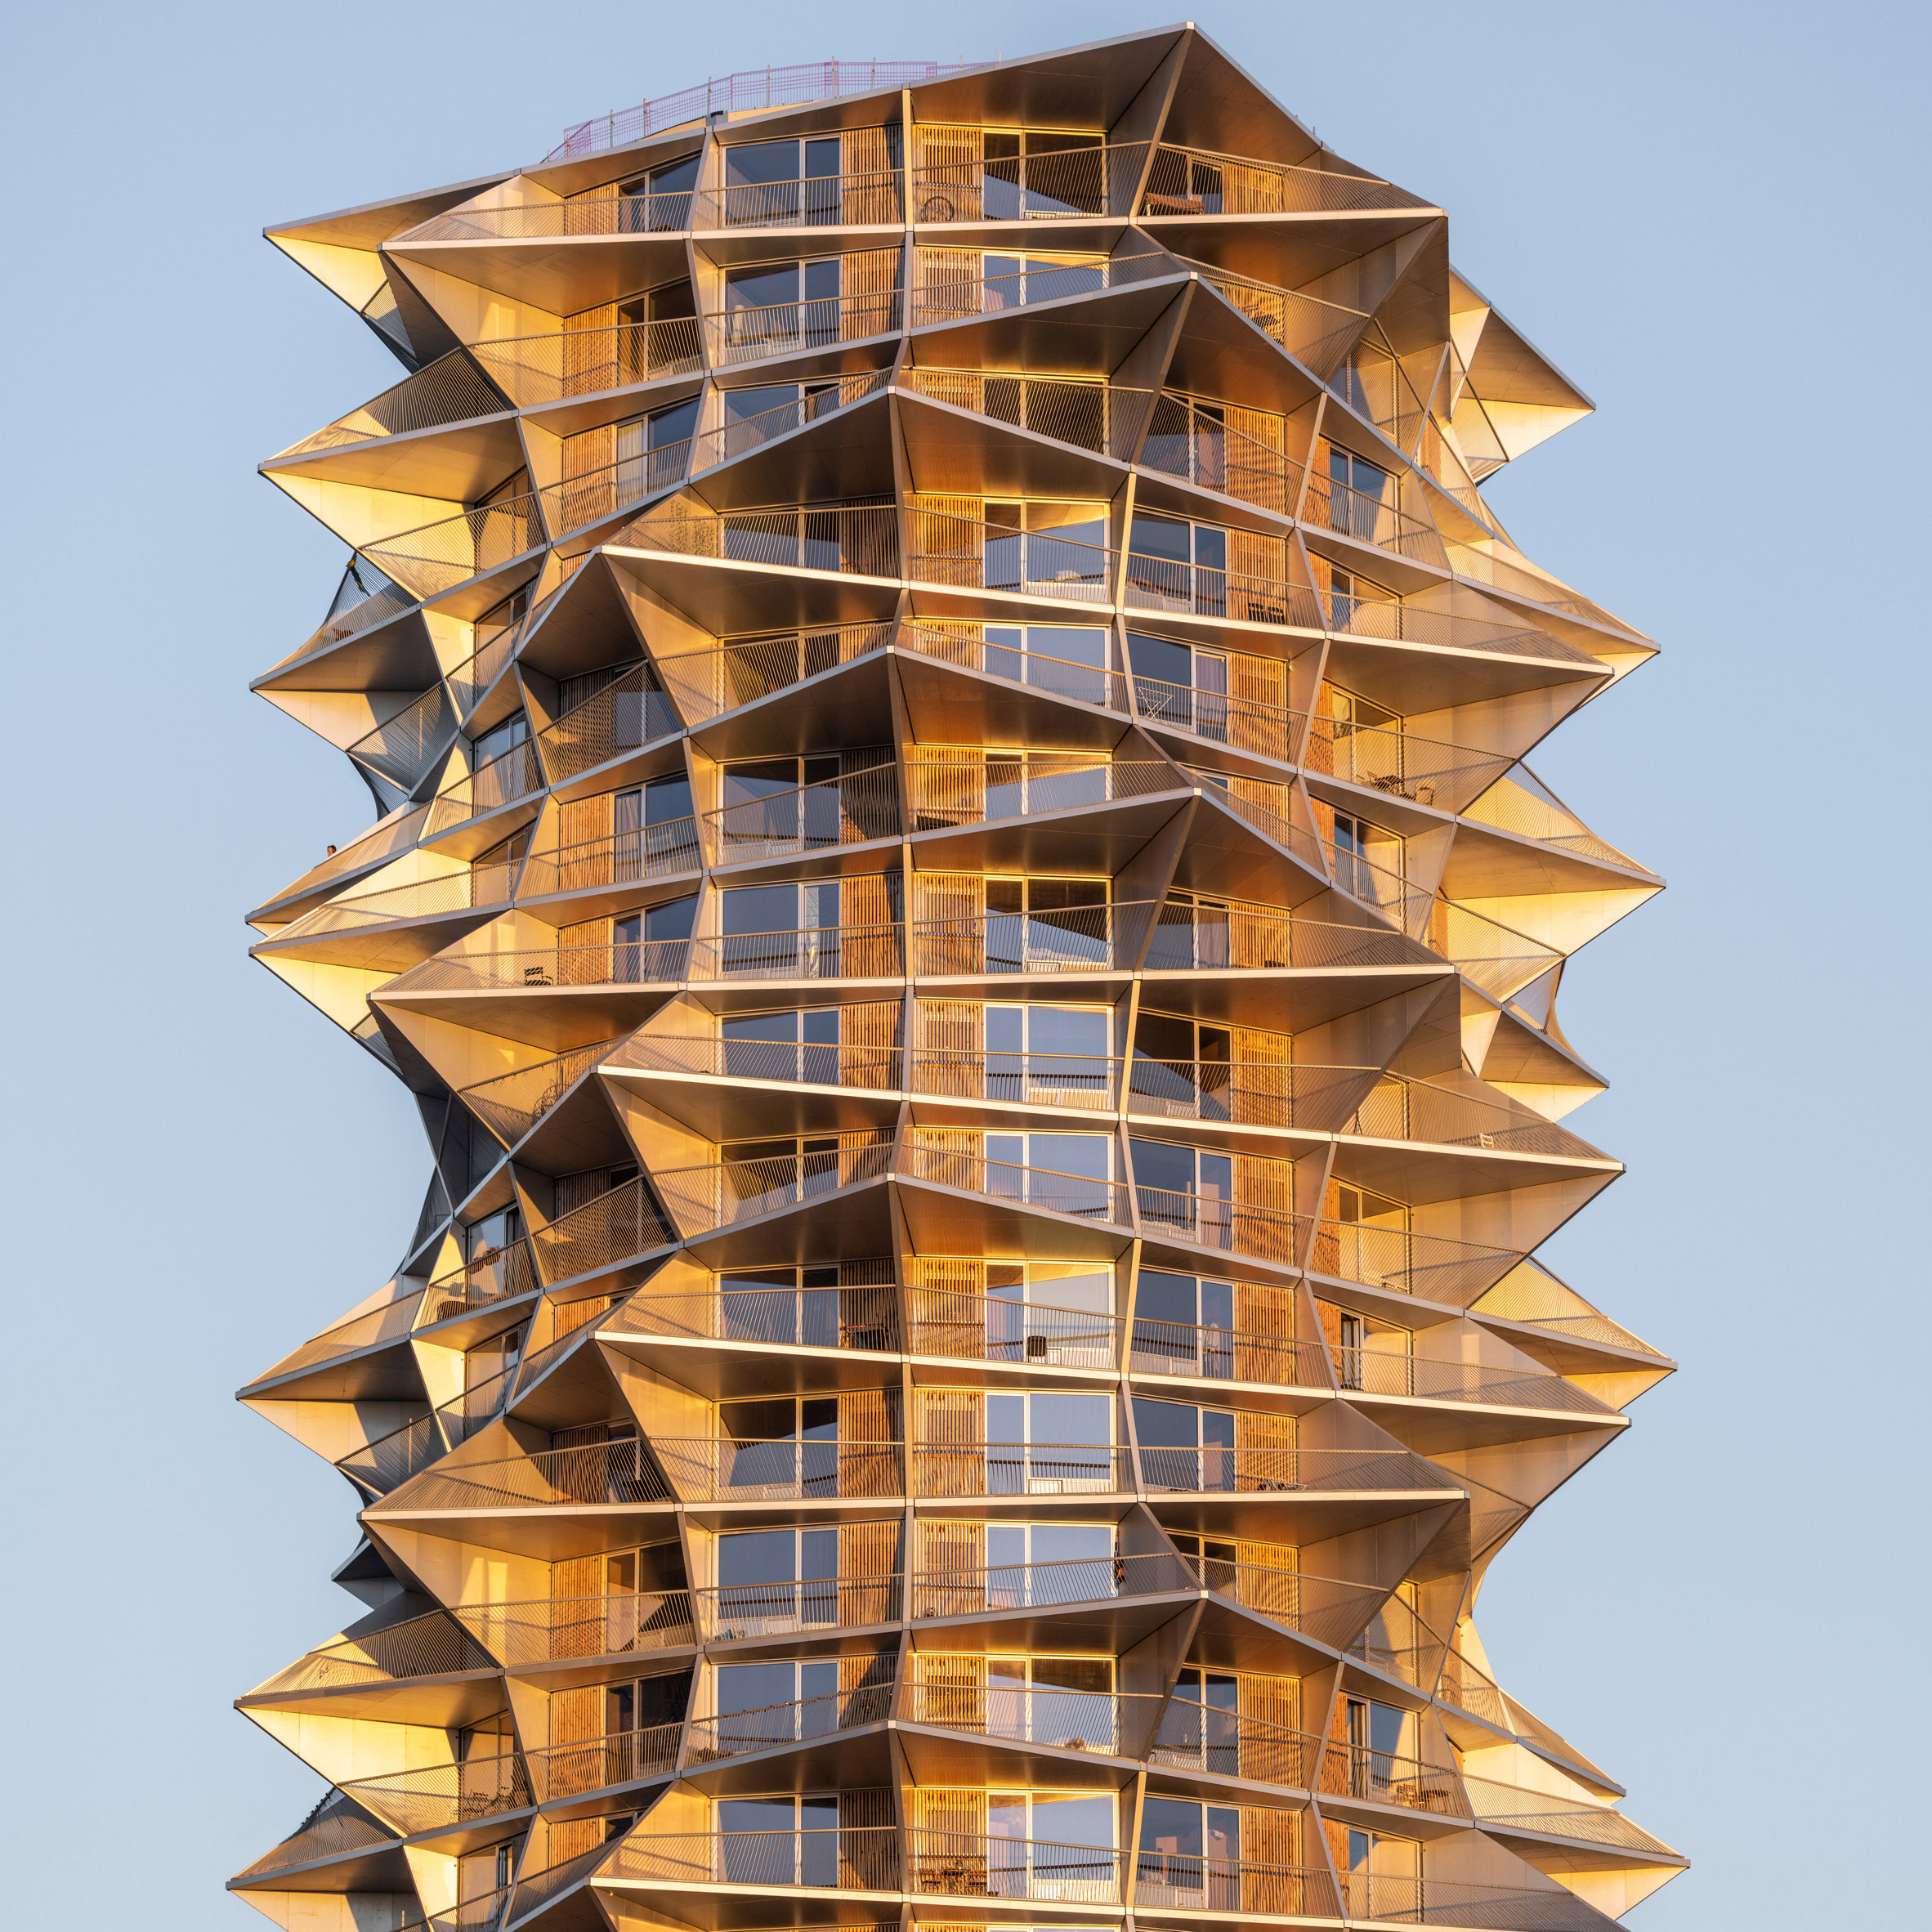 Exterior of one of the Kaktus Towers by BIG